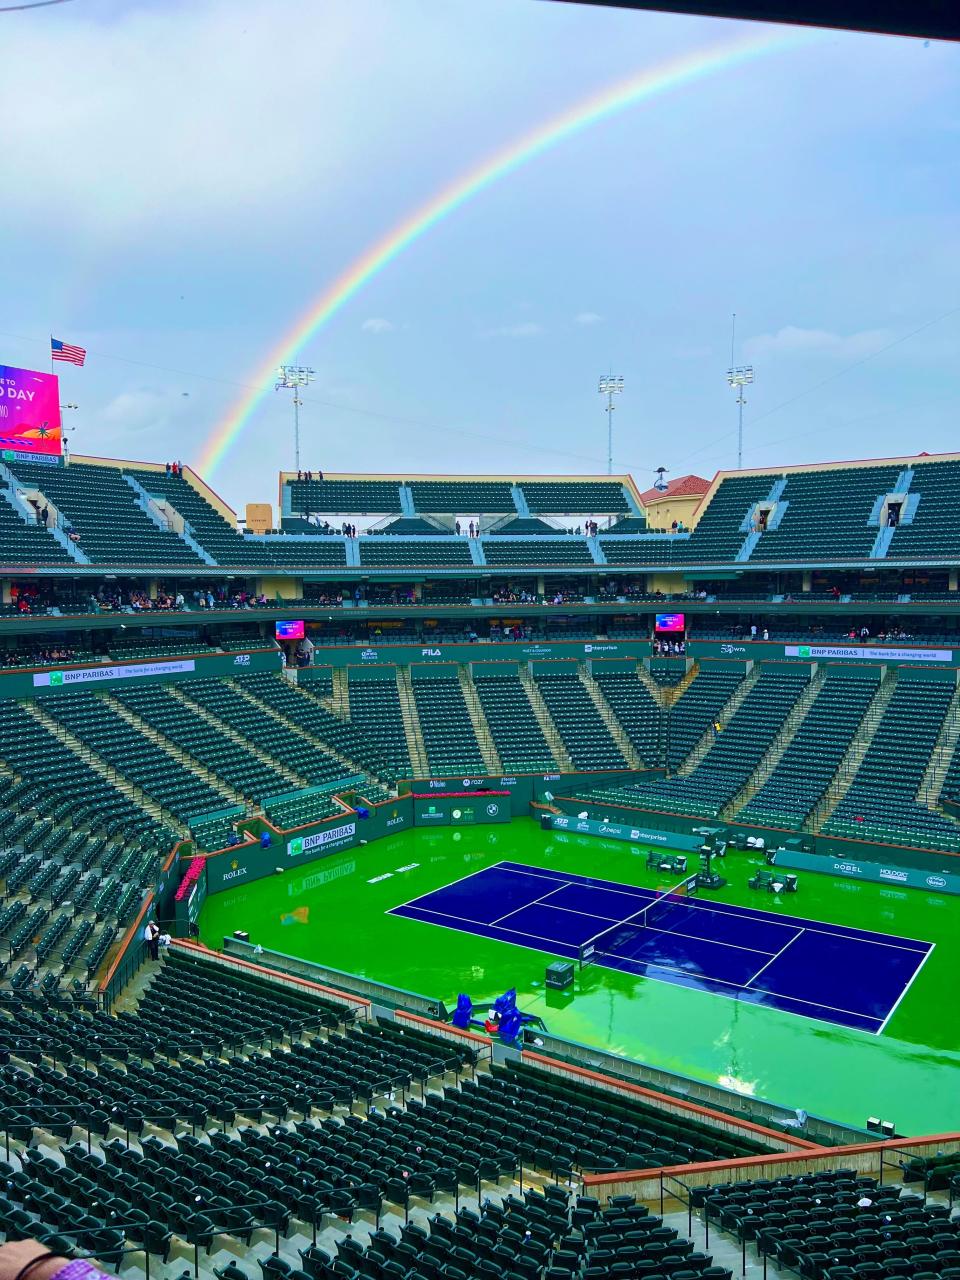 A rainbow aches over Stadium 1 at the Indian Wells Tennis Garden on Friday, March 10, 2023. Play was stopped for more than an hour, delaying the Shelby Rogers versus Maria Sakkari match at the 2023 BNP Paribas Open.